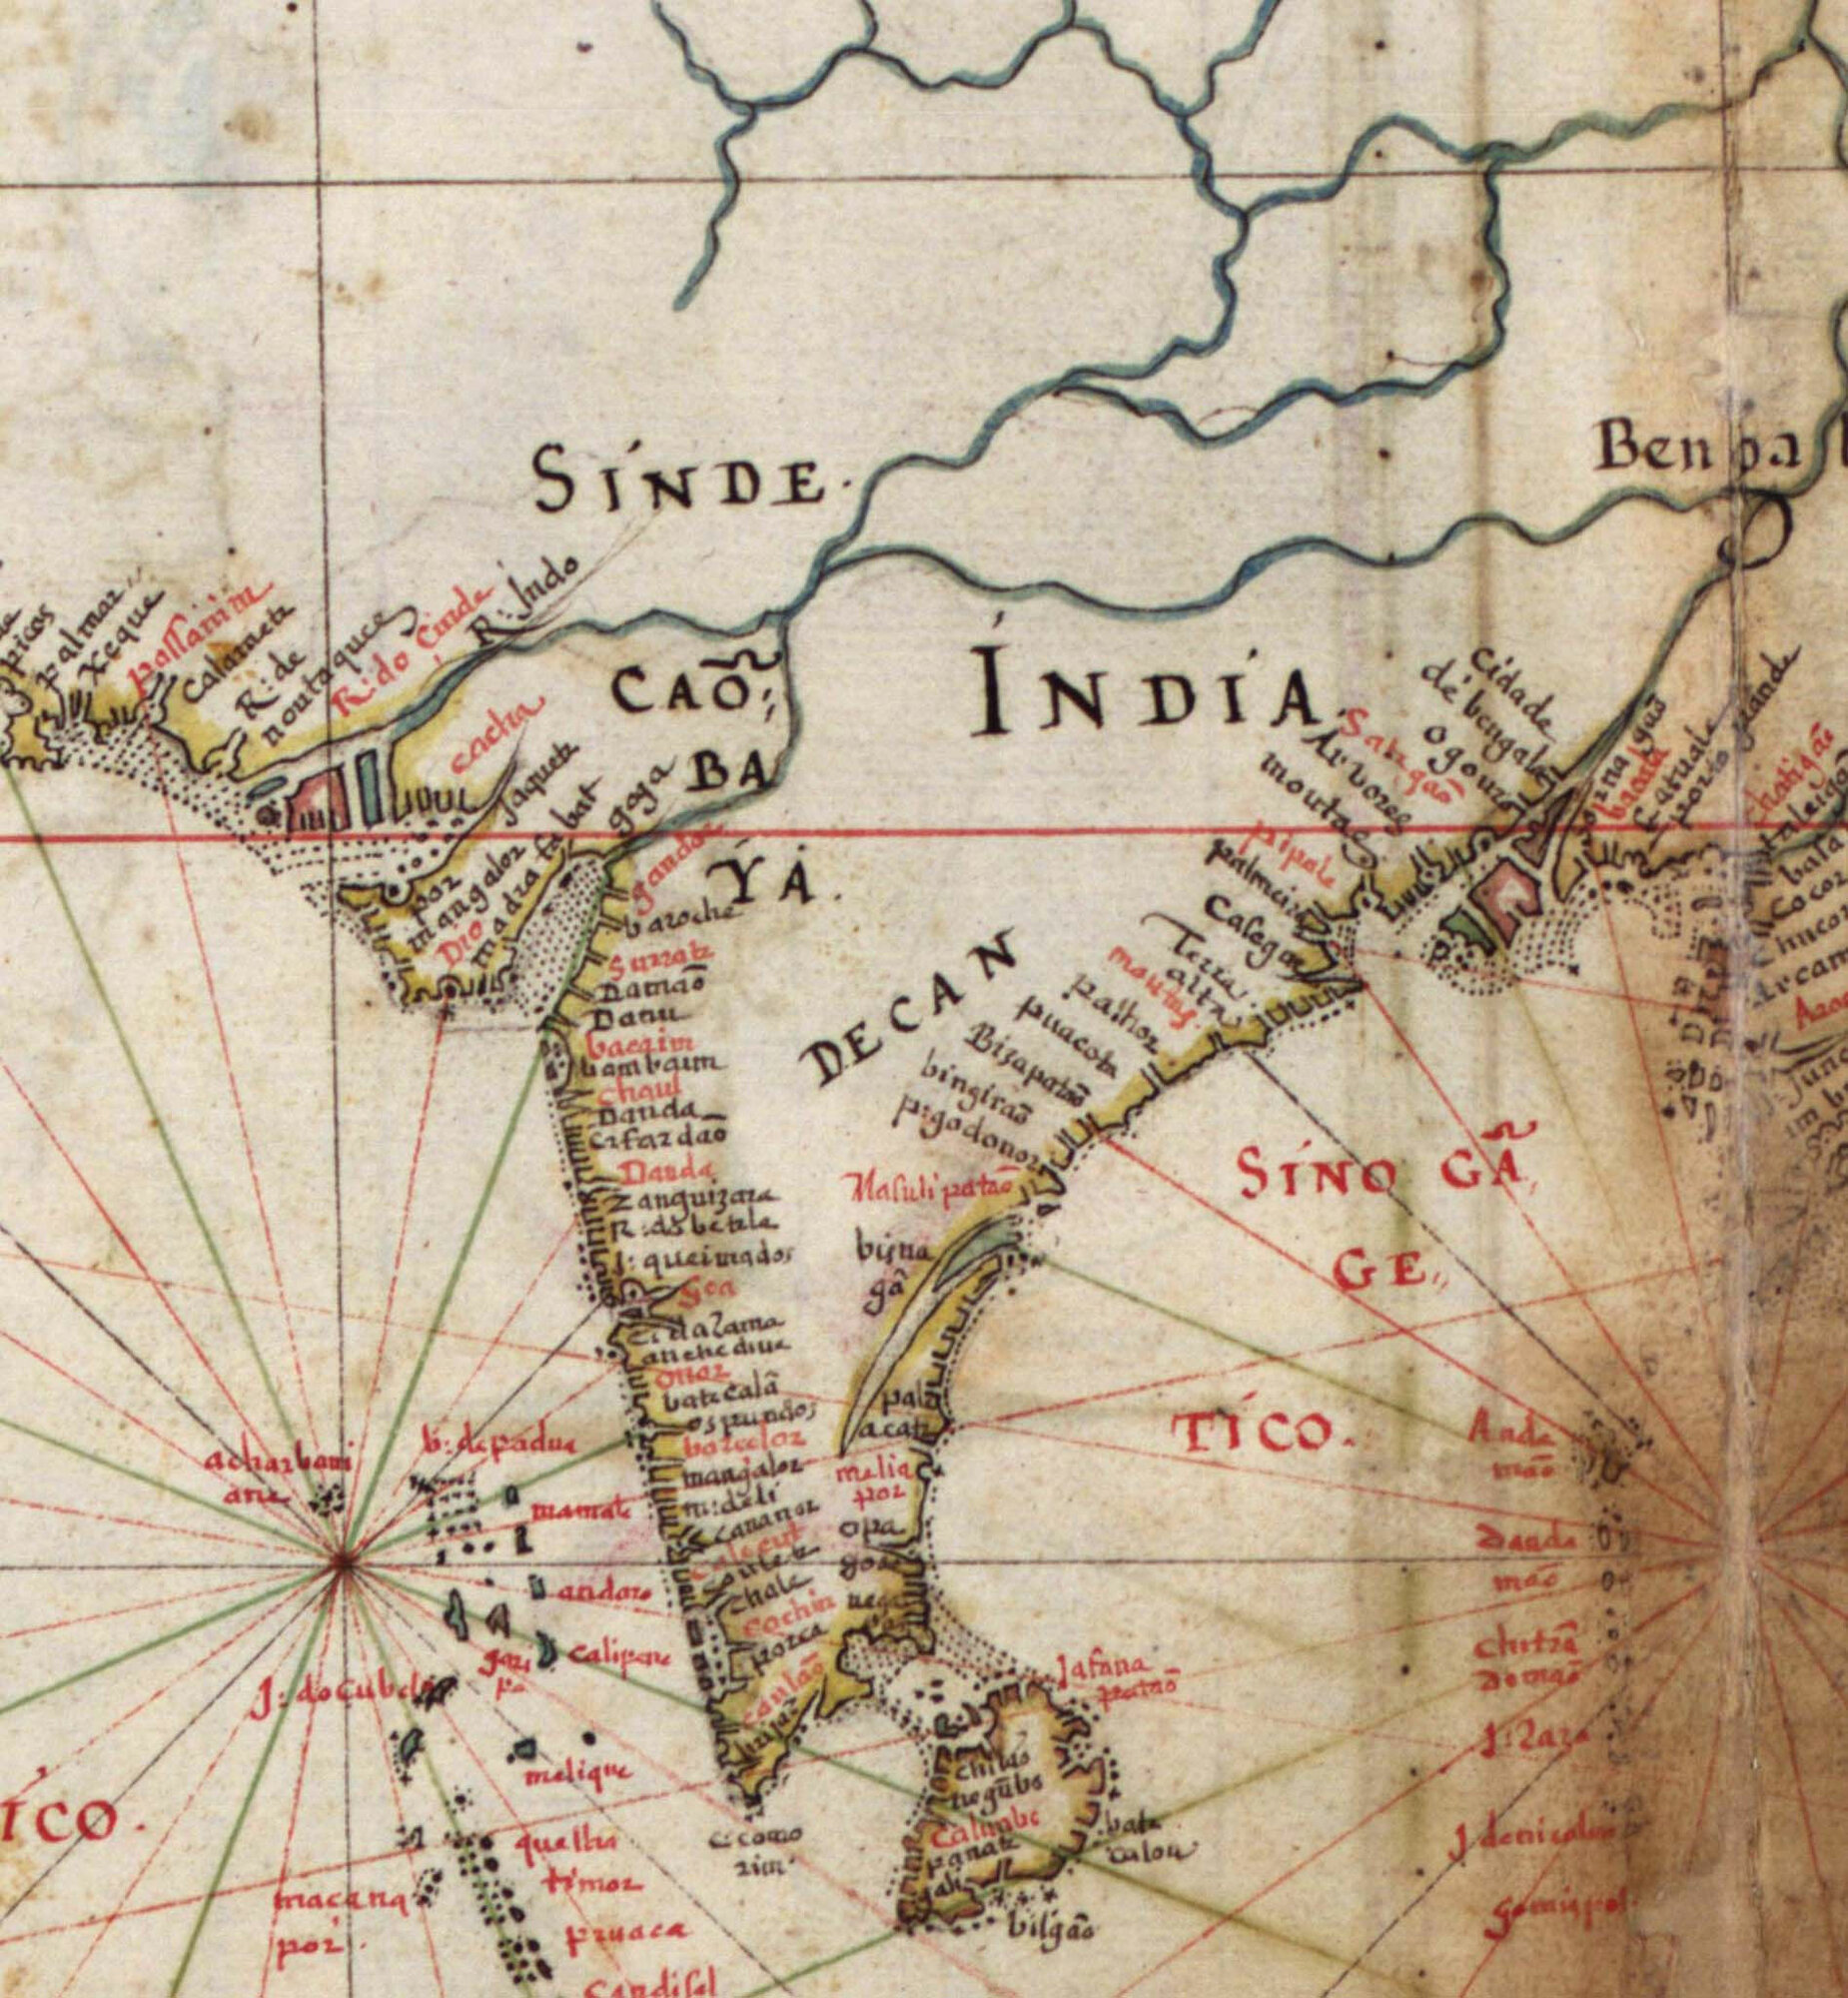 Portugues_map_of_India,_1630.jpg